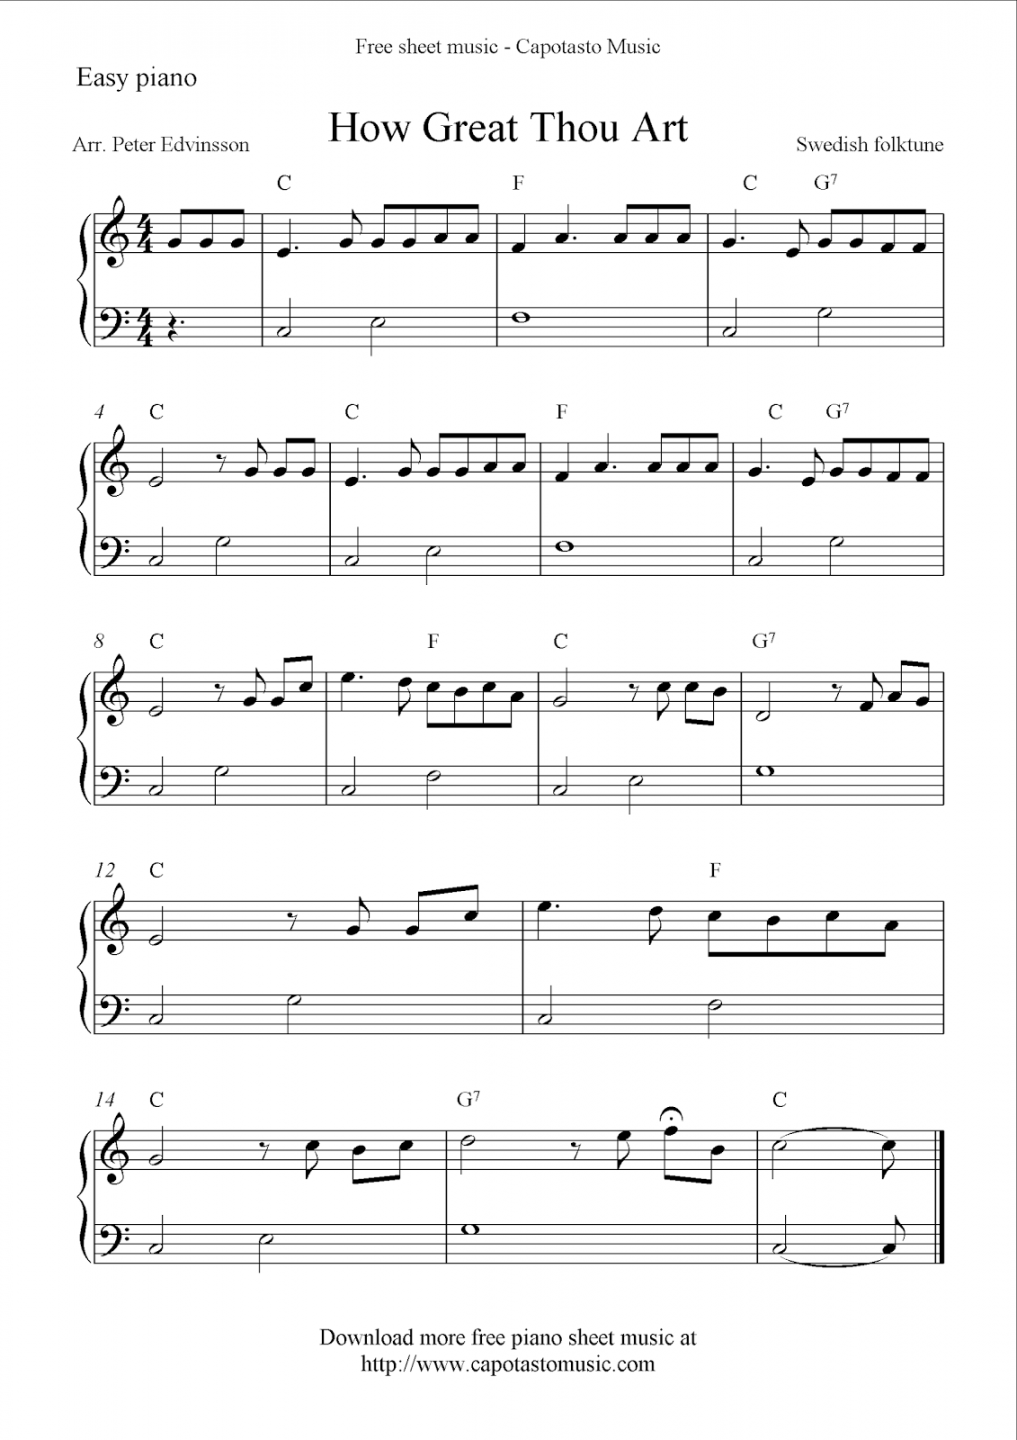 Free Printable Sheet Music For Piano - Printable - Free Sheet Music Scores: Free easy piano sheet music, How Great